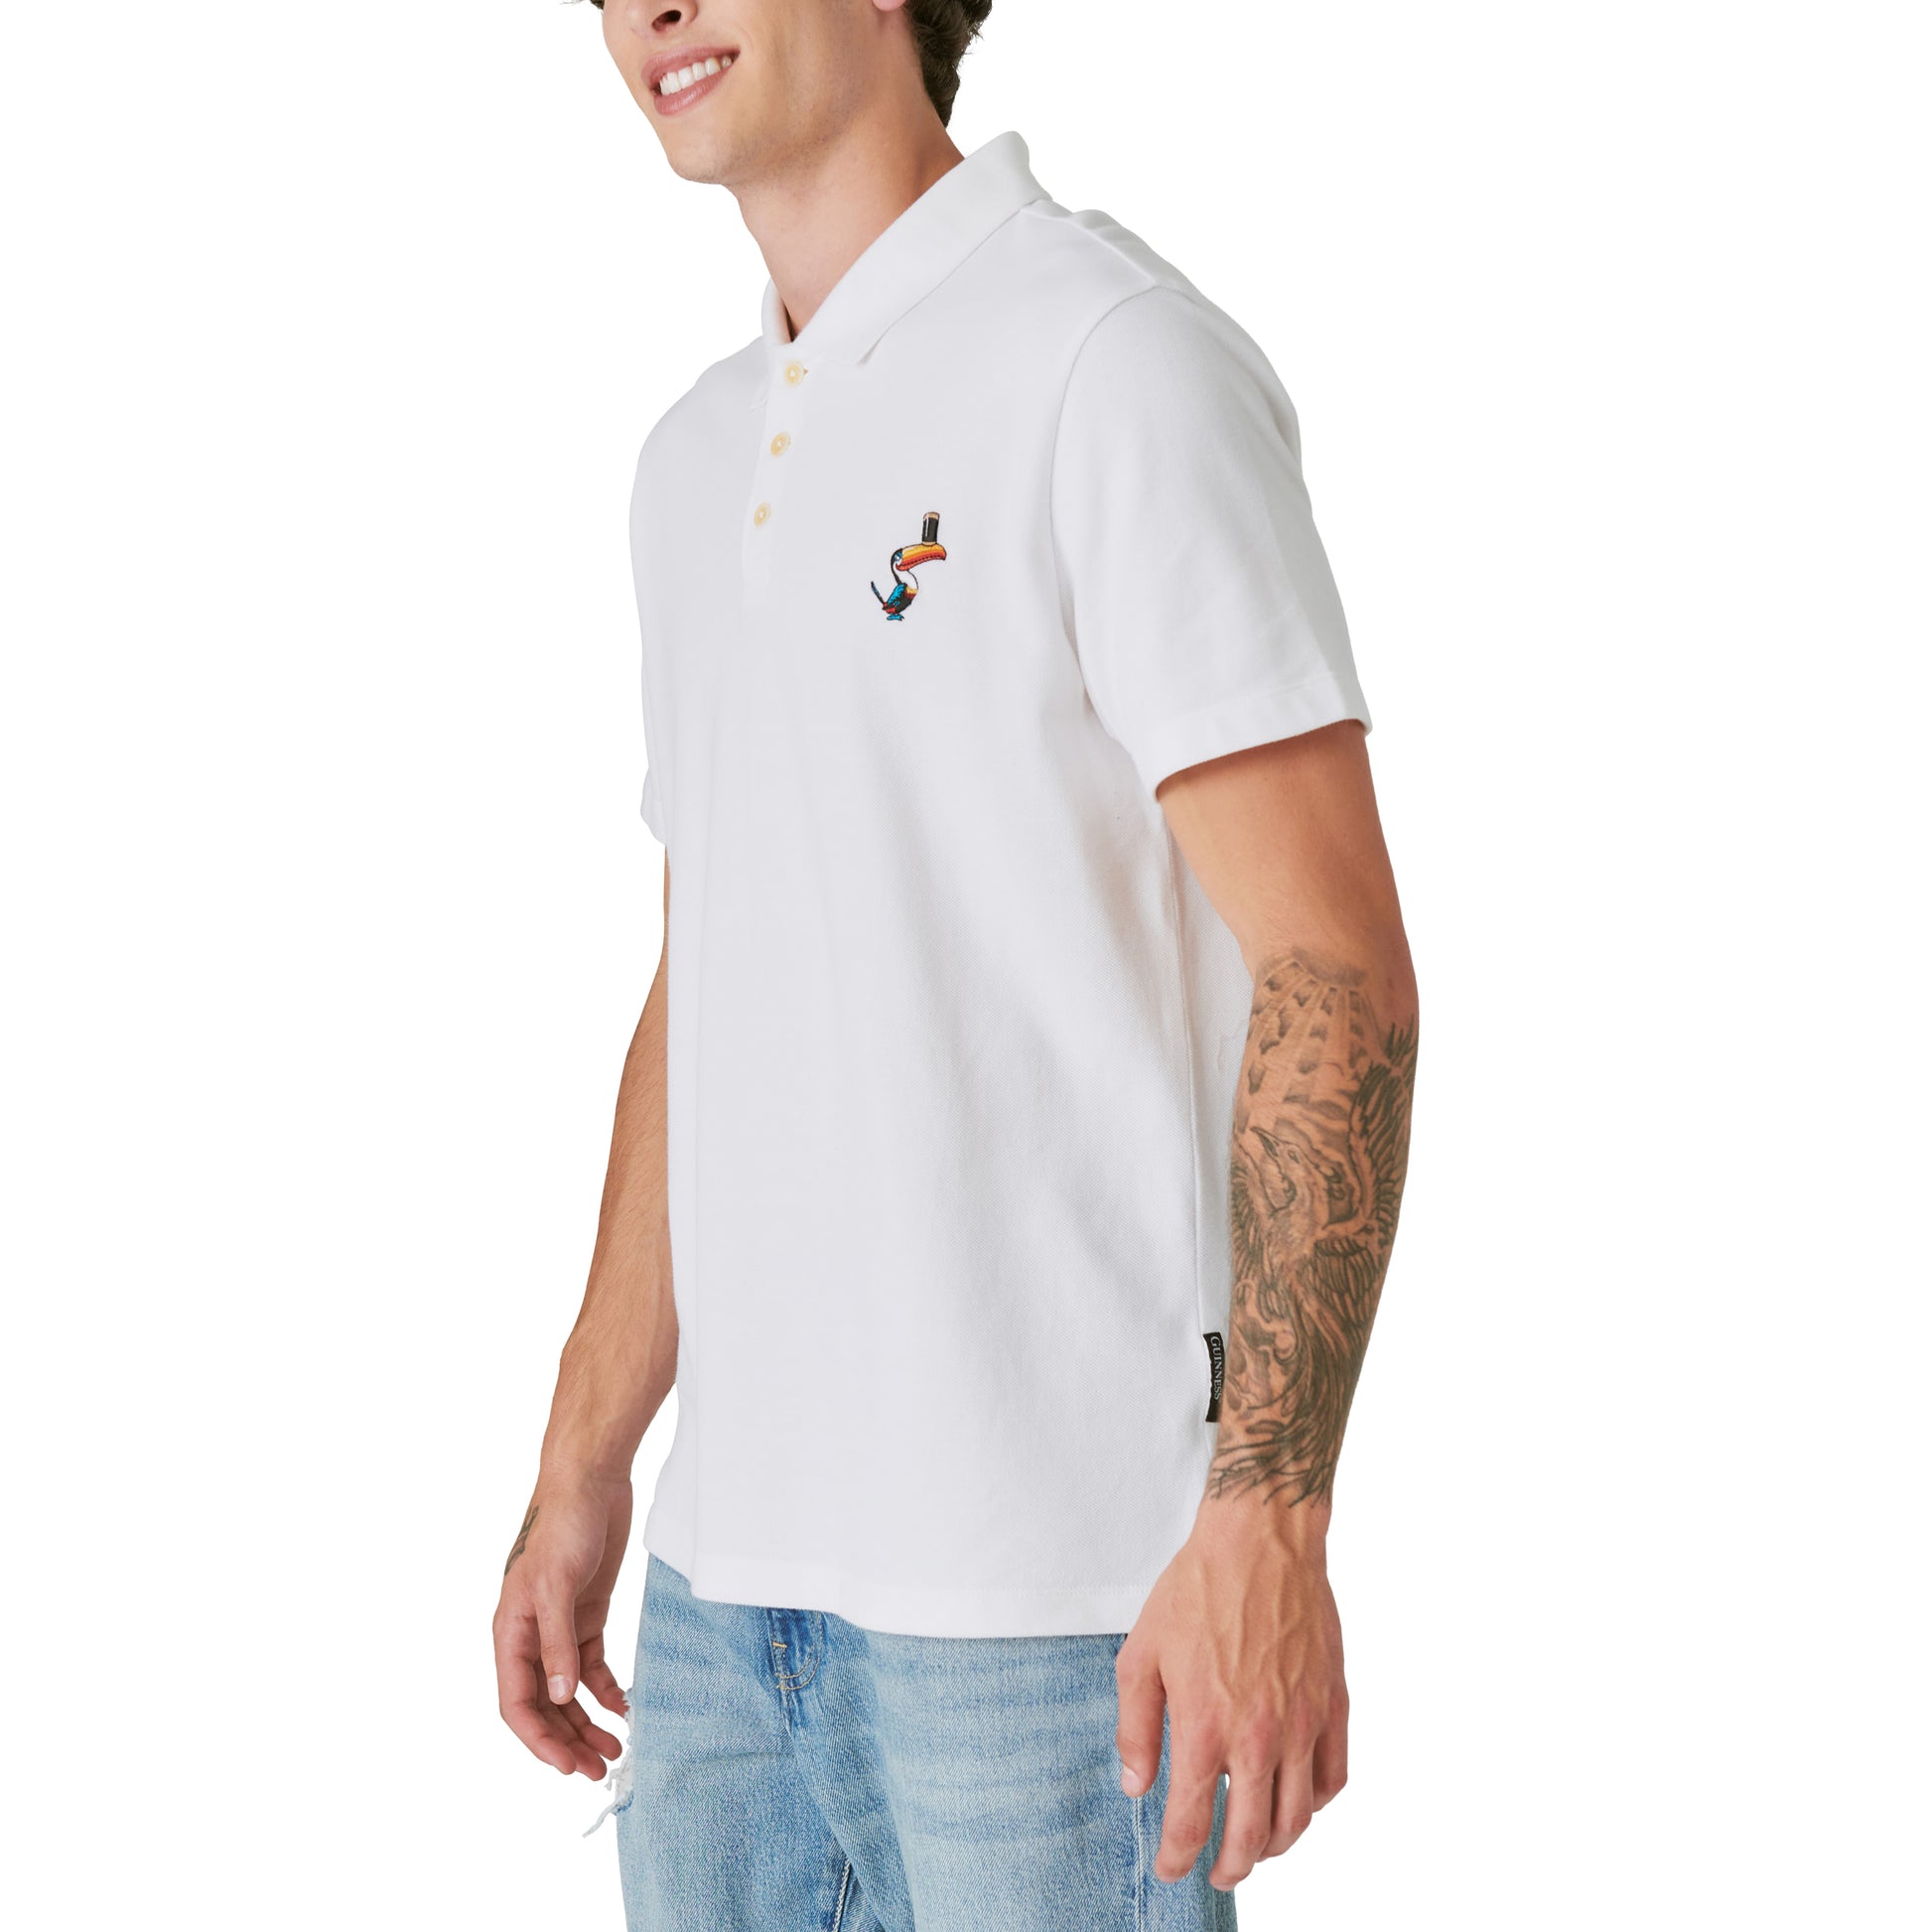 A man wearing a limited edition Guinness Webstore US - Bright White Polo shirt and jeans.